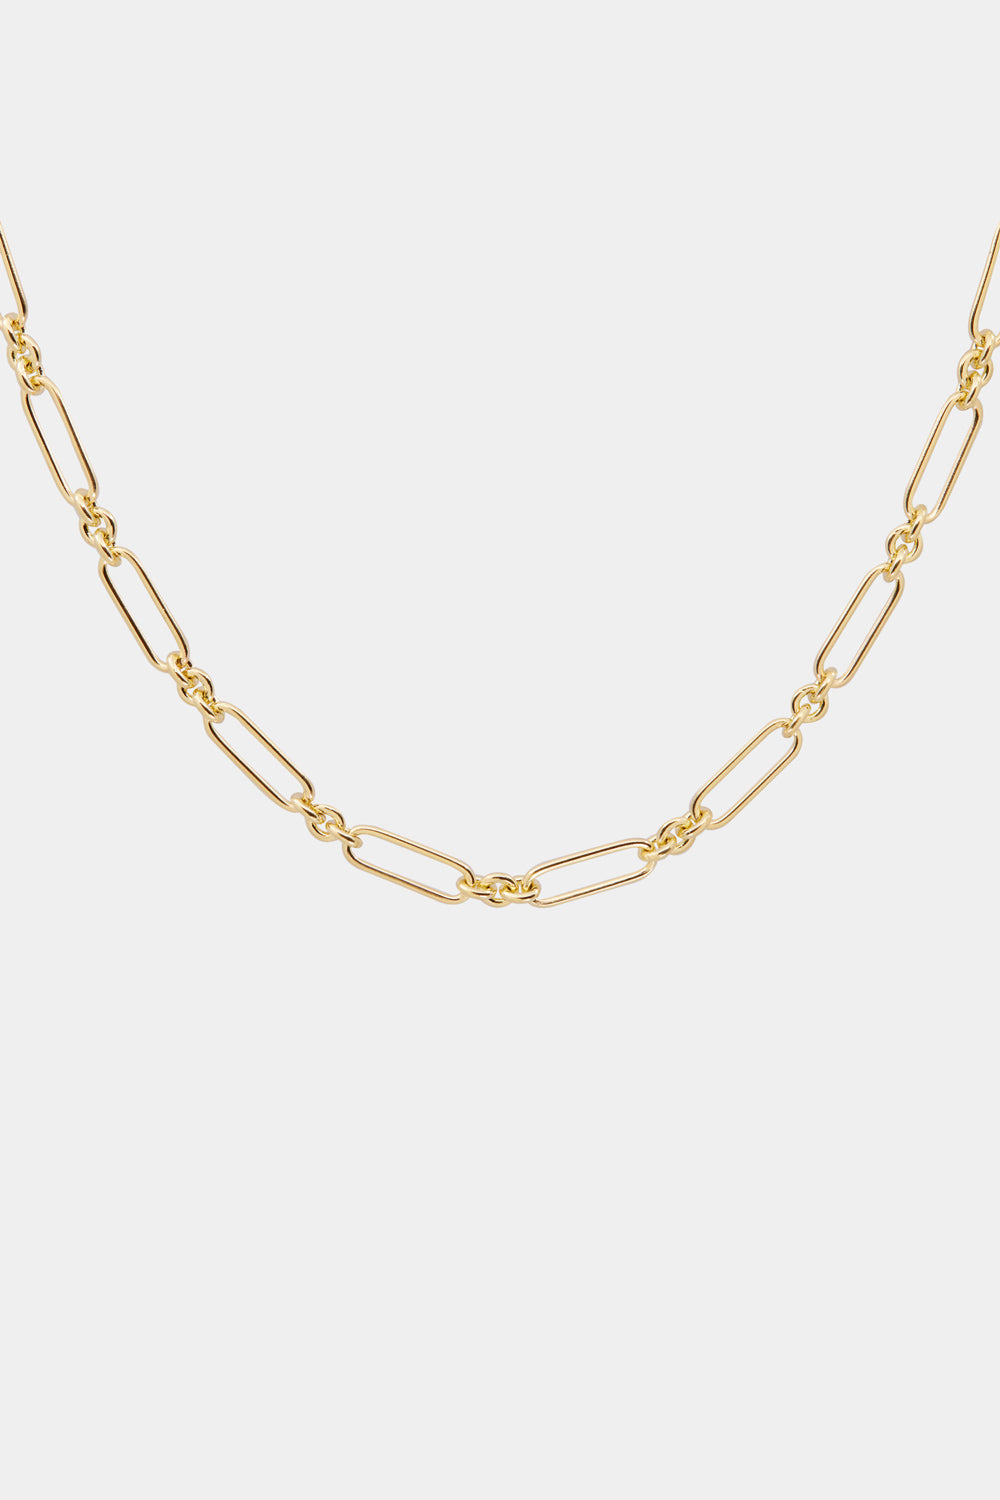 Mini Lennox Necklace | Gold, More Options Available